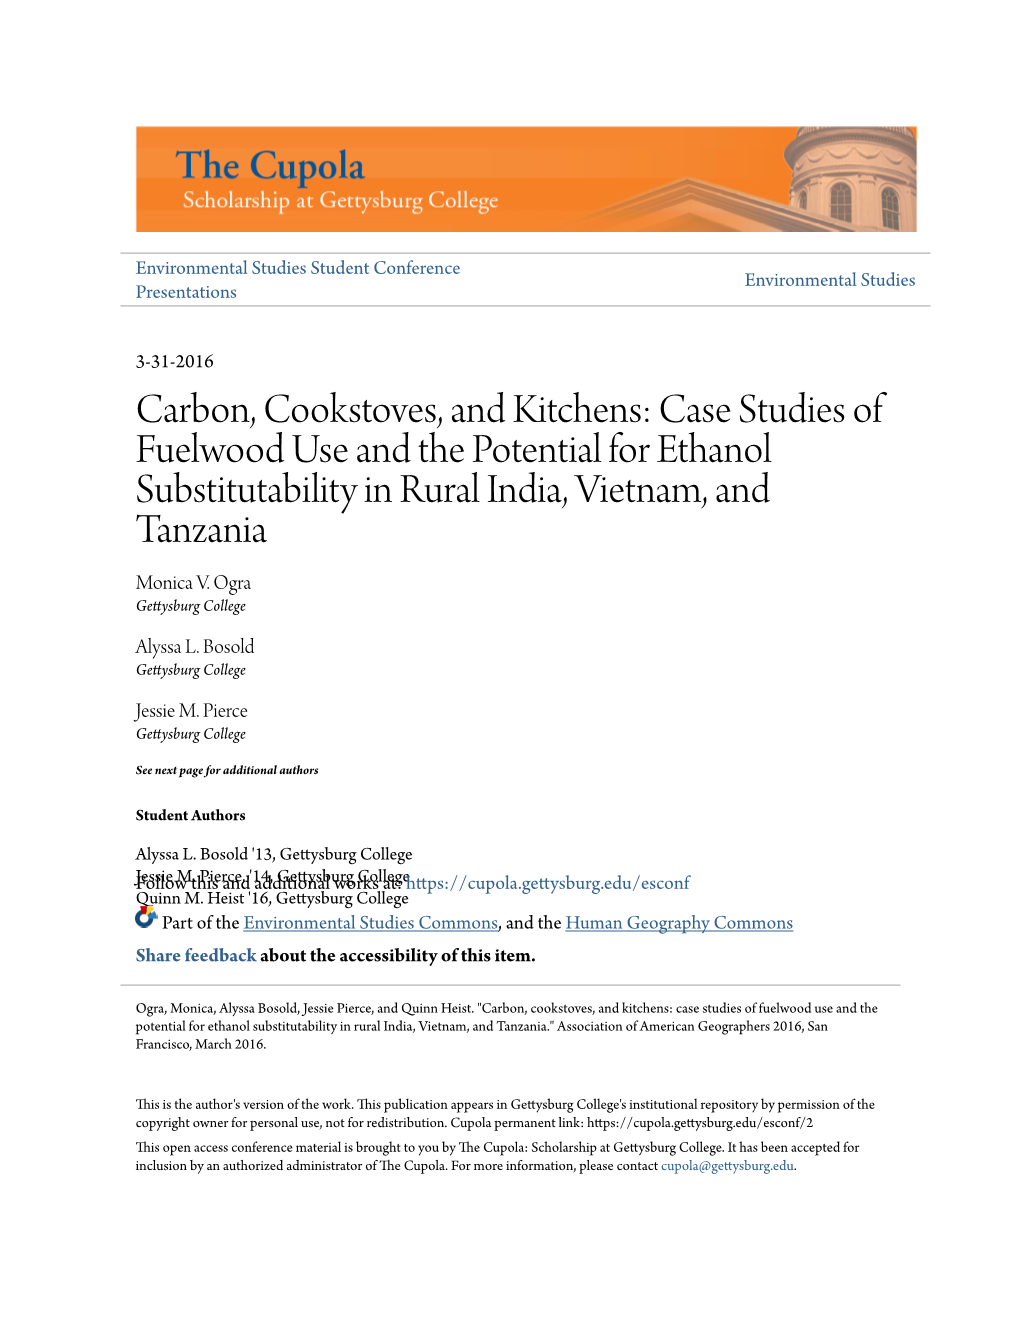 Carbon, Cookstoves, and Kitchens: Case Studies of Fuelwood Use and the Potential for Ethanol Substitutability in Rural India, Vietnam, and Tanzania Monica V